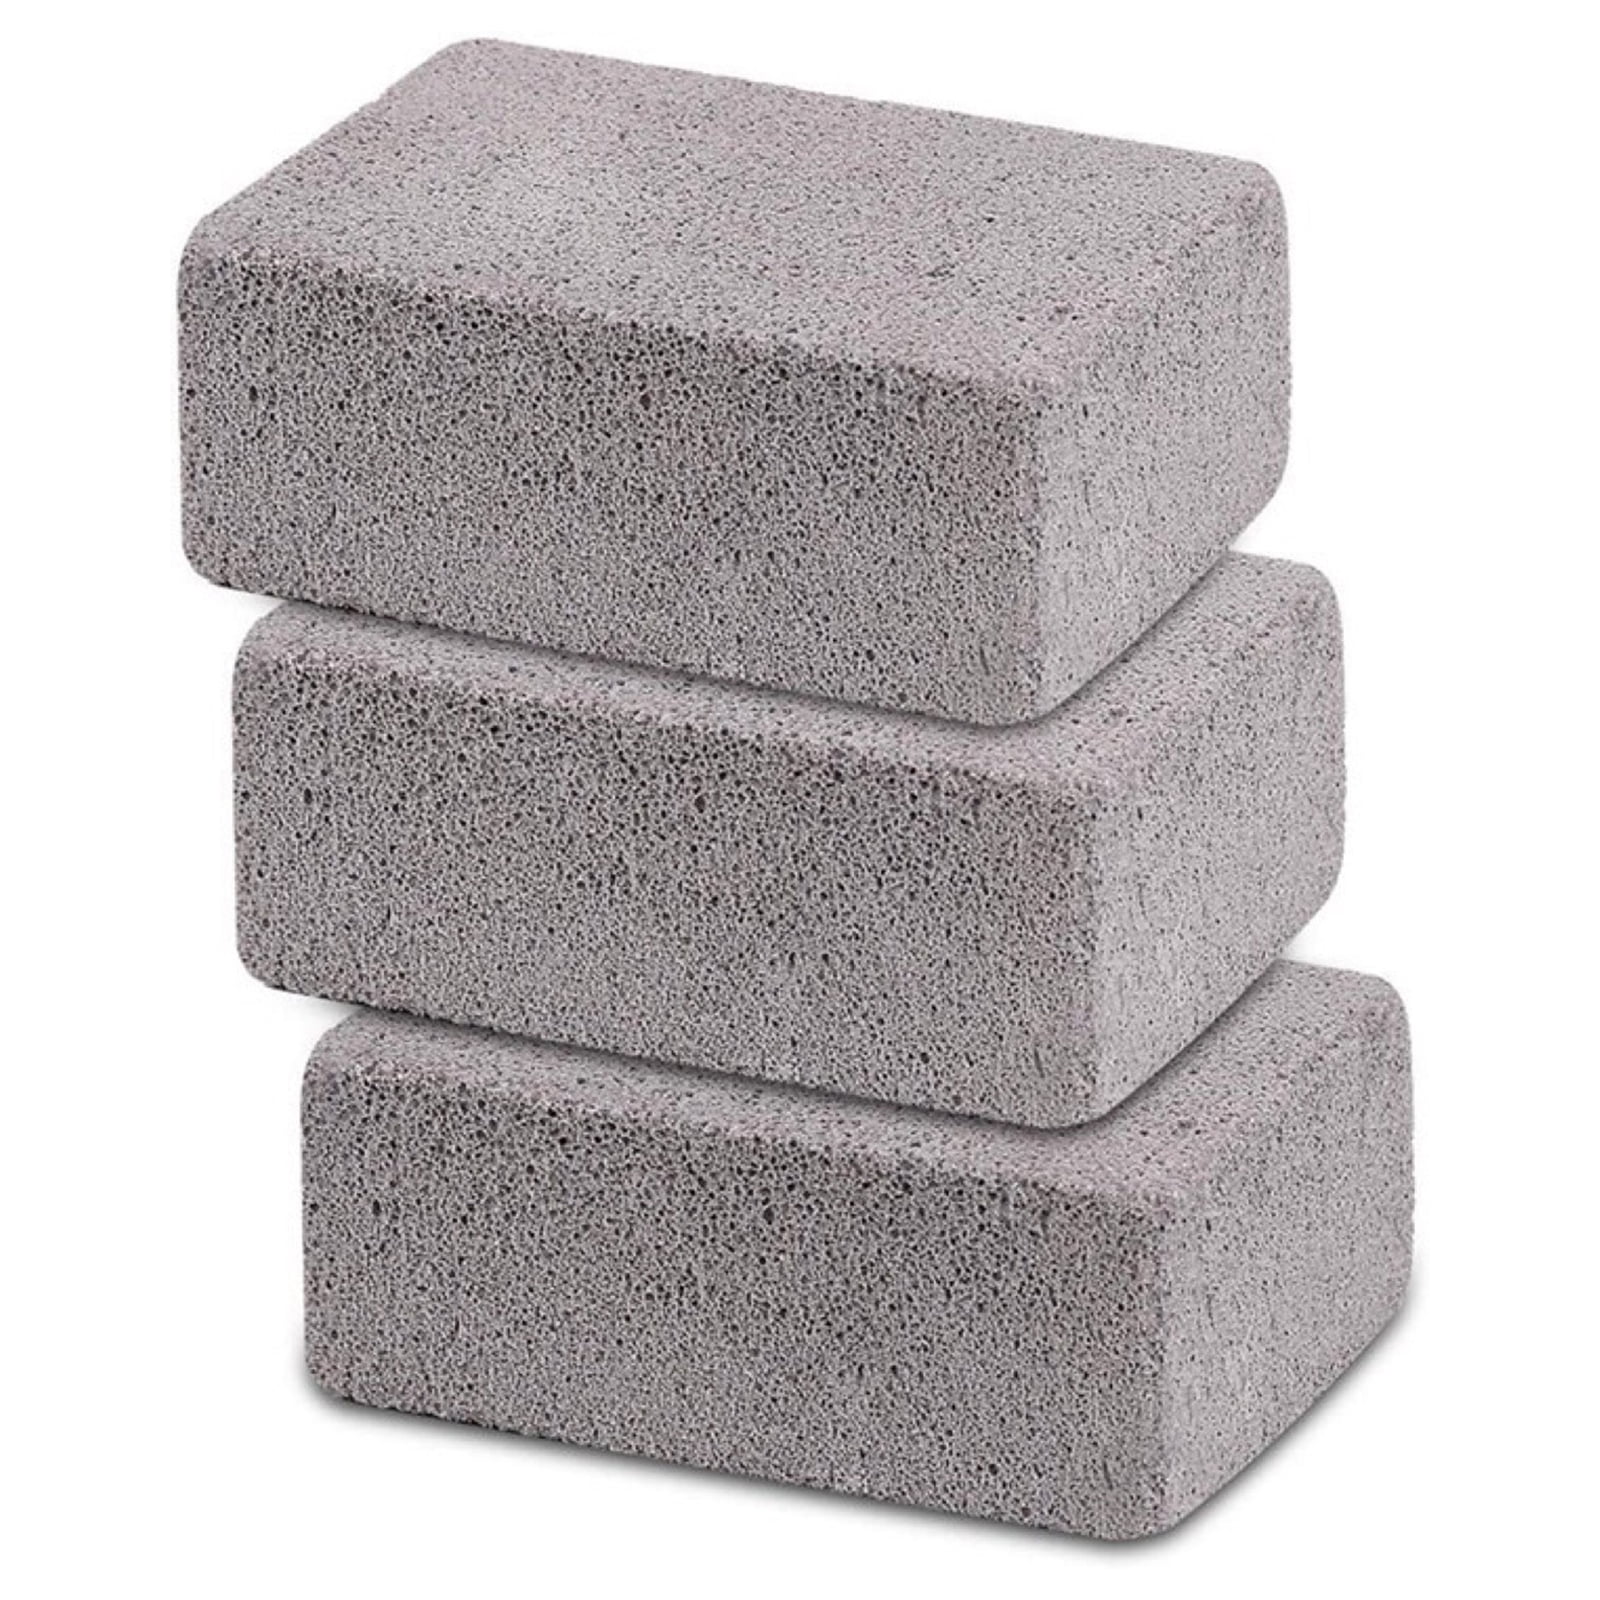 Ajmyonsp 8Pack Grill Griddle Cleaning Brick Block Brick-A Magic Stone Pumice for 